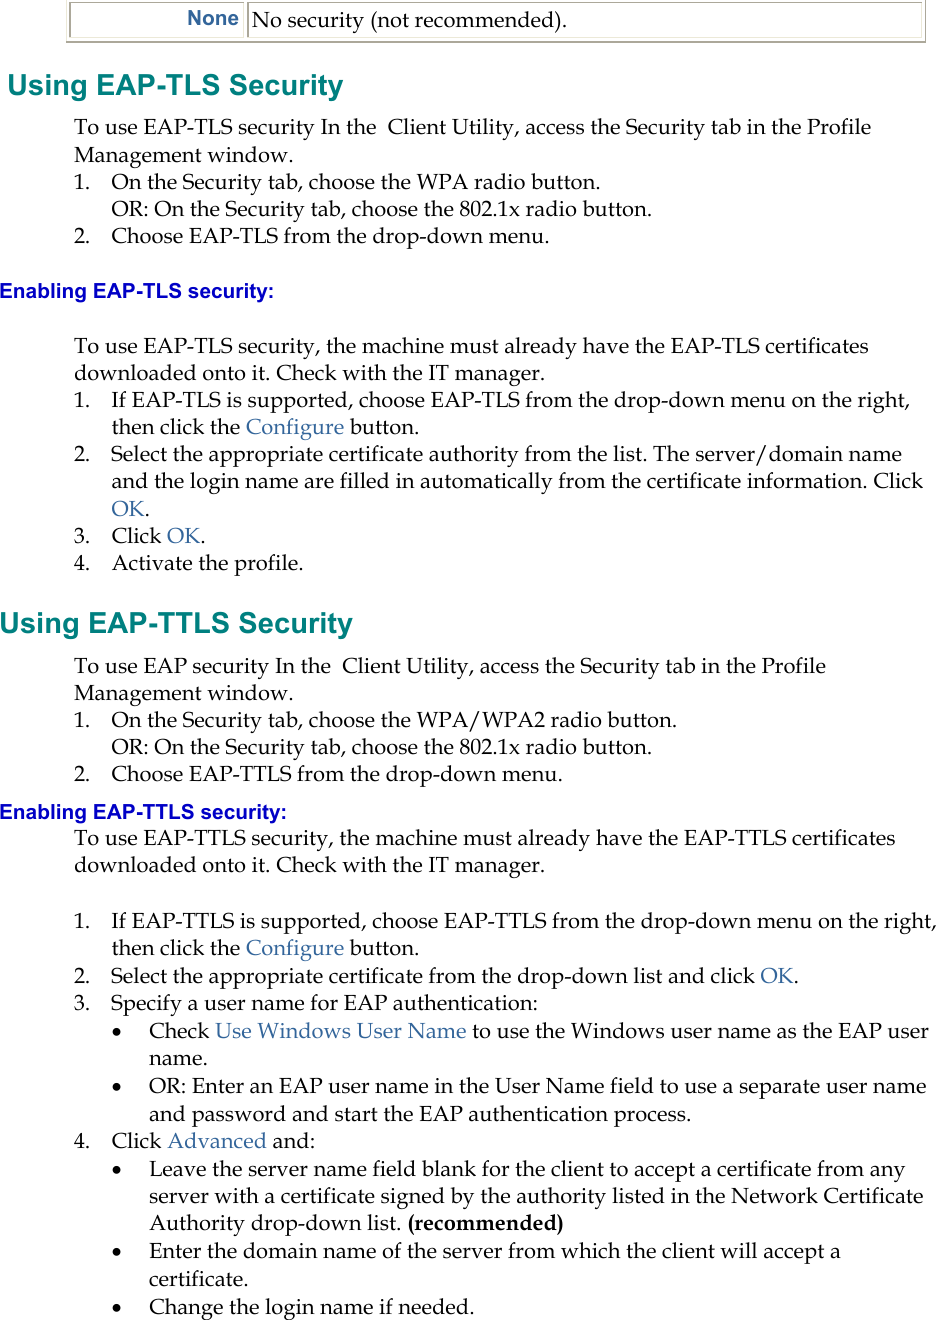  None No security (not recommended).  Using EAP-TLS Security To use EAP-TLS security In the  Client Utility, access the Security tab in the Profile Management window.  1.  On the Security tab, choose the WPA radio button.  OR: On the Security tab, choose the 802.1x radio button.  2.  Choose EAP-TLS from the drop-down menu. Enabling EAP-TLS security: To use EAP-TLS security, the machine must already have the EAP-TLS certificates downloaded onto it. Check with the IT manager. 1.  If EAP-TLS is supported, choose EAP-TLS from the drop-down menu on the right, then click the Configure button. 2.  Select the appropriate certificate authority from the list. The server/domain name and the login name are filled in automatically from the certificate information. Click OK. 3. Click OK. 4.  Activate the profile. Using EAP-TTLS Security To use EAP security In the  Client Utility, access the Security tab in the Profile Management window.  1.  On the Security tab, choose the WPA/WPA2 radio button.  OR: On the Security tab, choose the 802.1x radio button.  2.  Choose EAP-TTLS from the drop-down menu. Enabling EAP-TTLS security: To use EAP-TTLS security, the machine must already have the EAP-TTLS certificates downloaded onto it. Check with the IT manager. 1.  If EAP-TTLS is supported, choose EAP-TTLS from the drop-down menu on the right, then click the Configure button. 2.  Select the appropriate certificate from the drop-down list and click OK. 3.  Specify a user name for EAP authentication: •  Check Use Windows User Name to use the Windows user name as the EAP user name. •  OR: Enter an EAP user name in the User Name field to use a separate user name and password and start the EAP authentication process.  4. Click Advanced and: •  Leave the server name field blank for the client to accept a certificate from any server with a certificate signed by the authority listed in the Network Certificate Authority drop-down list. (recommended) •  Enter the domain name of the server from which the client will accept a certificate.   •  Change the login name if needed. 